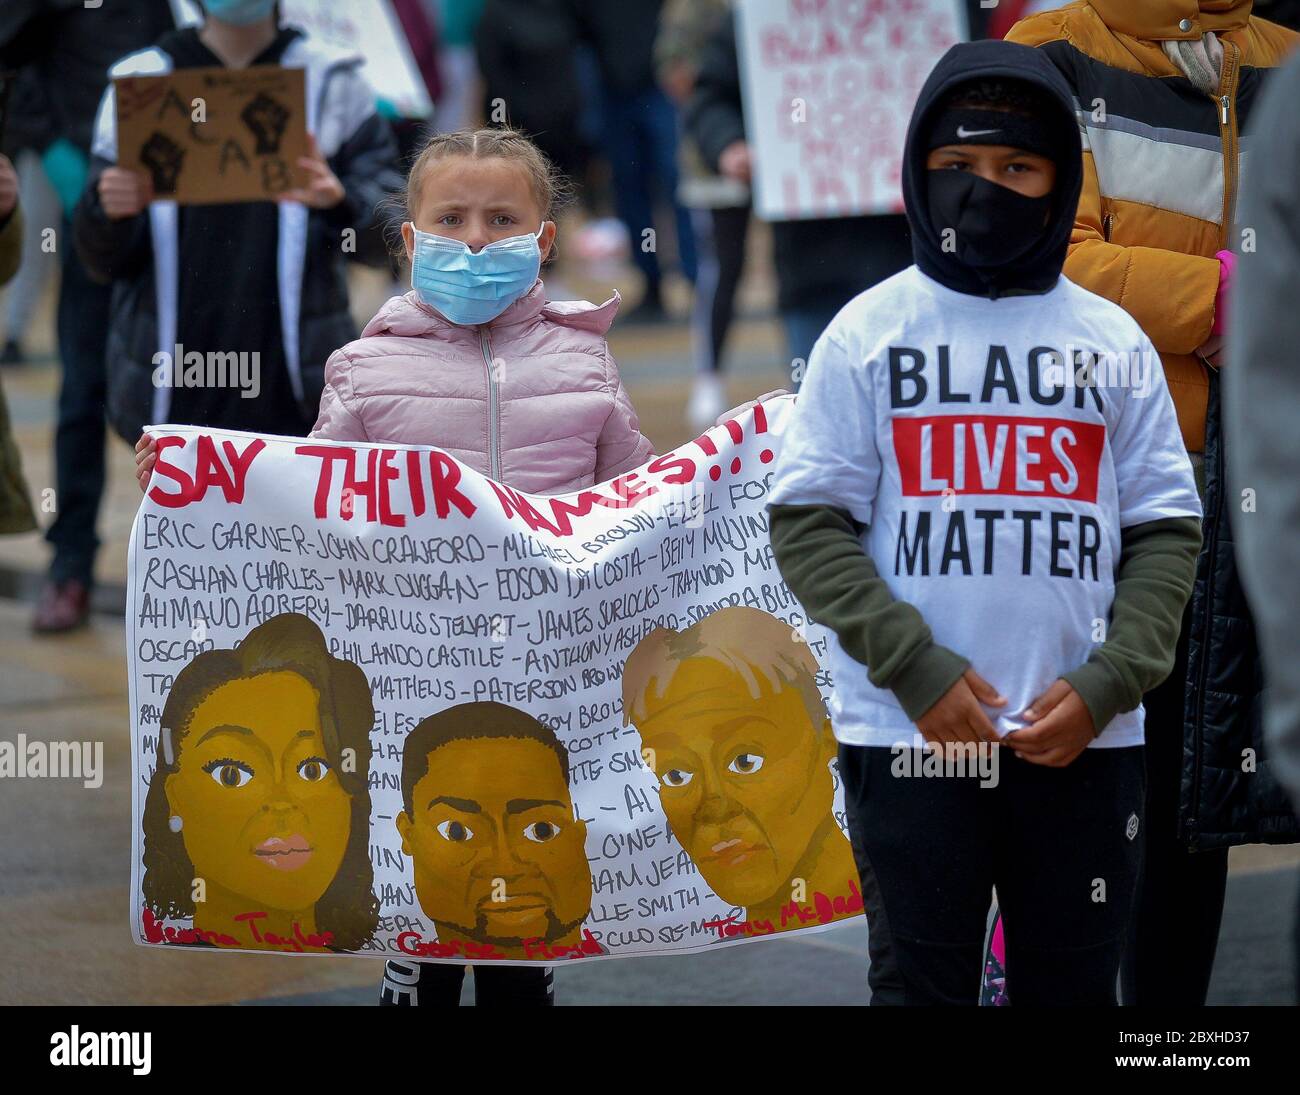 Children hold banners during a Justice for George Floyd rally in Guildhall Square, Londonderry, Northern Ireland. ©George Sweeney / Alamy Stock Photo Stock Photo